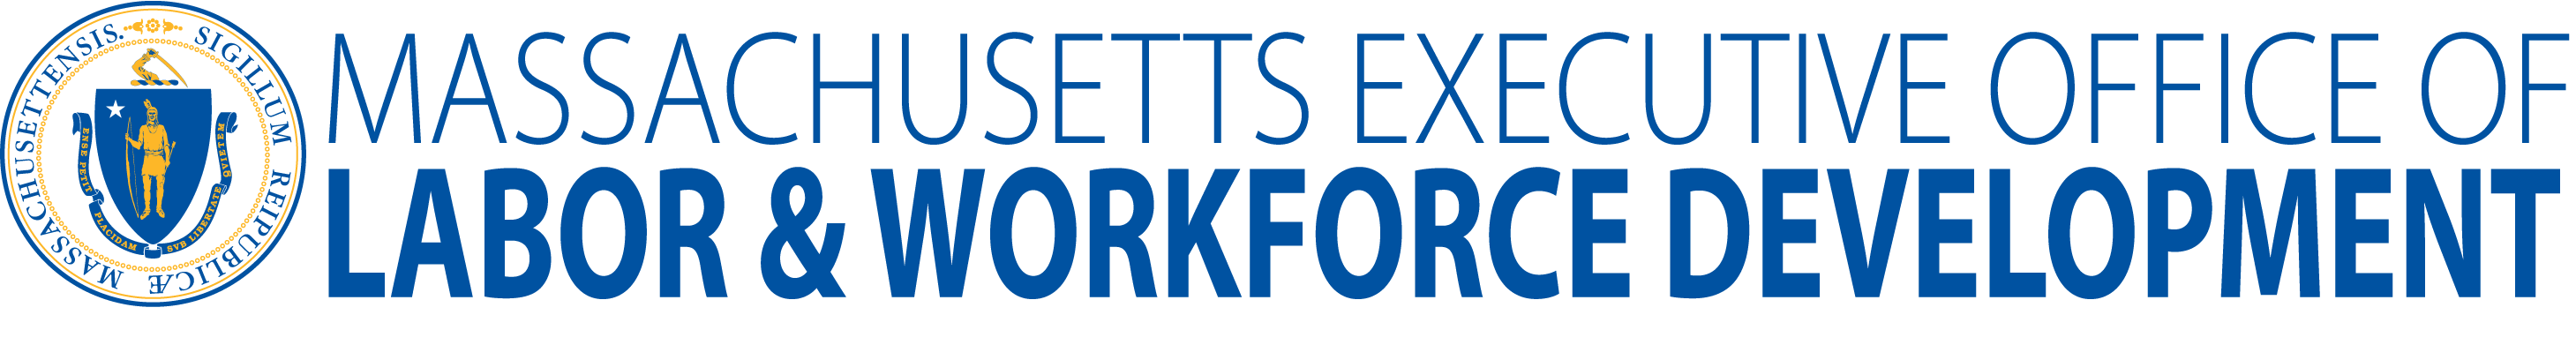 Executive Office of Labor and Workforce Development 